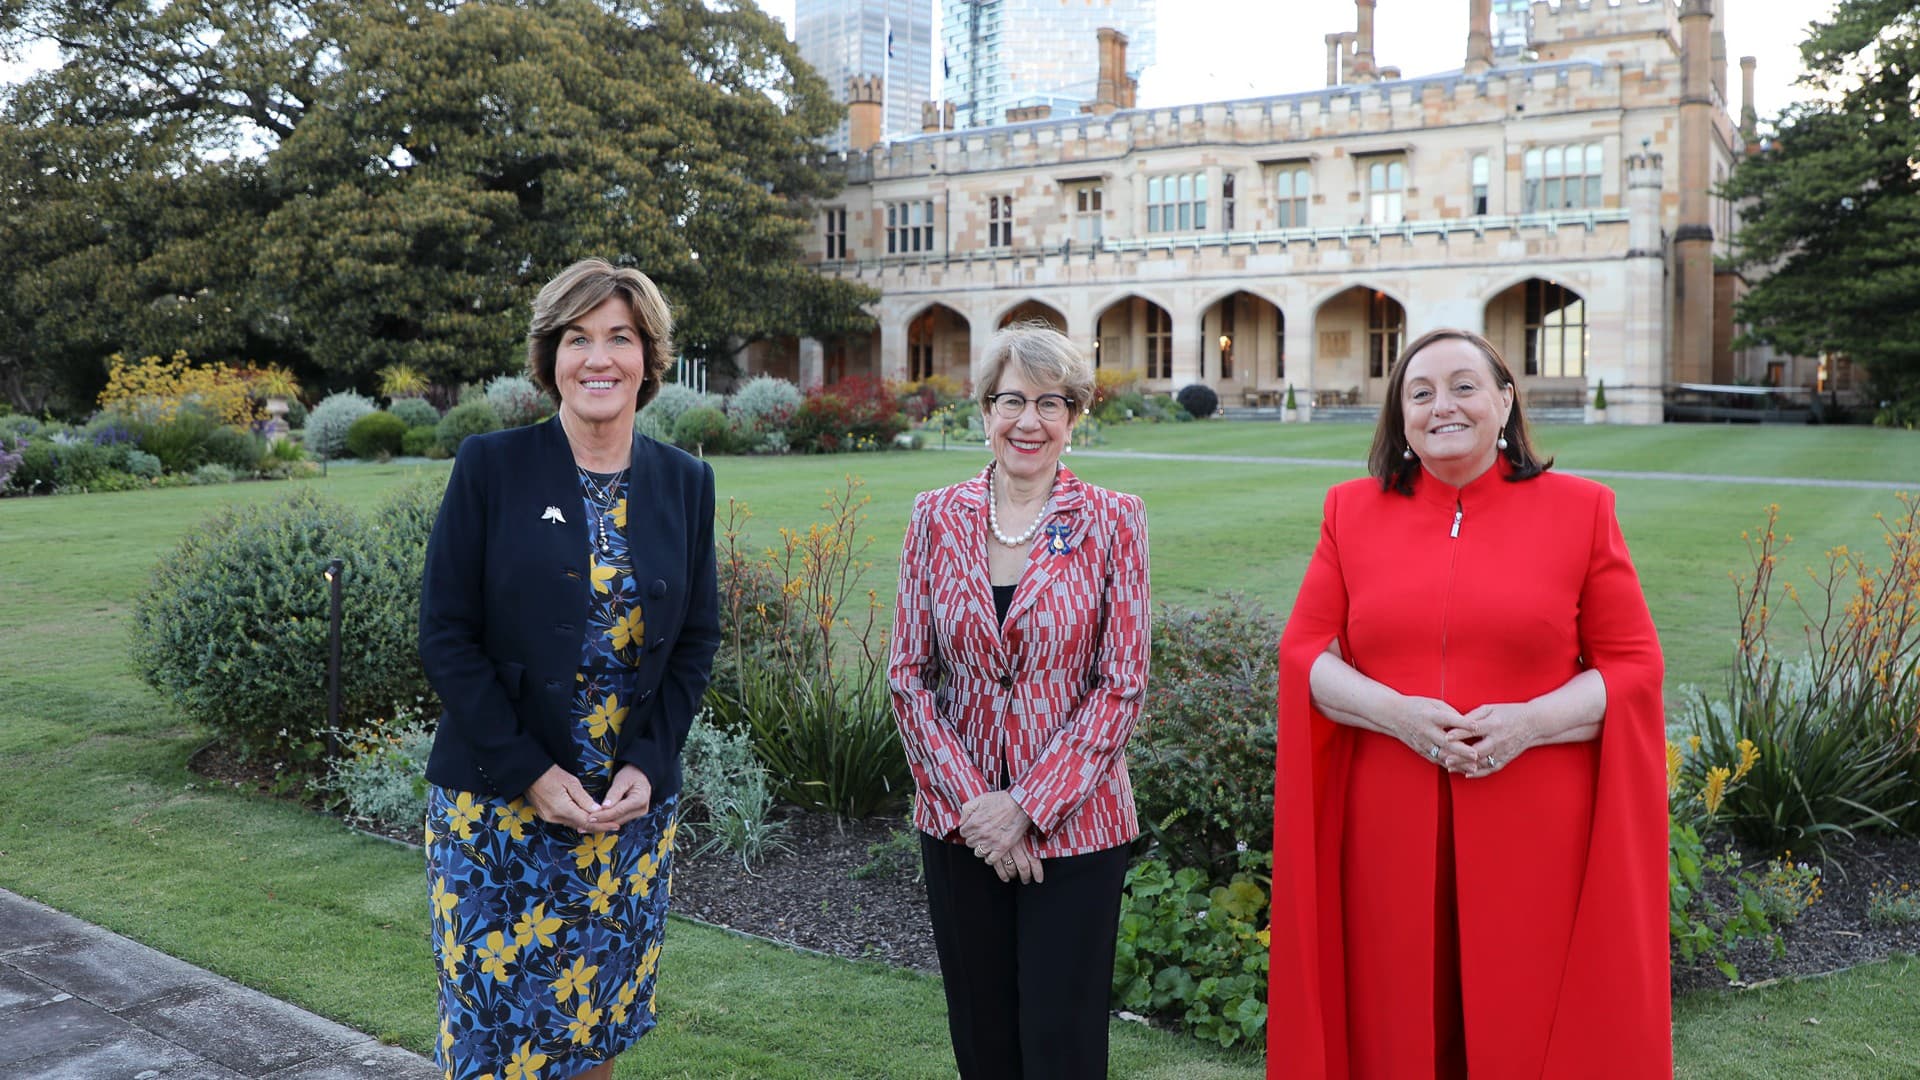 From left, UOW Chancellor Christine McLaughlin, The Honorable Margaret Beazley, NSW Governor, and UOW Vice-Chancellor Professor Patricia Davidson. Photo: Government House NSW